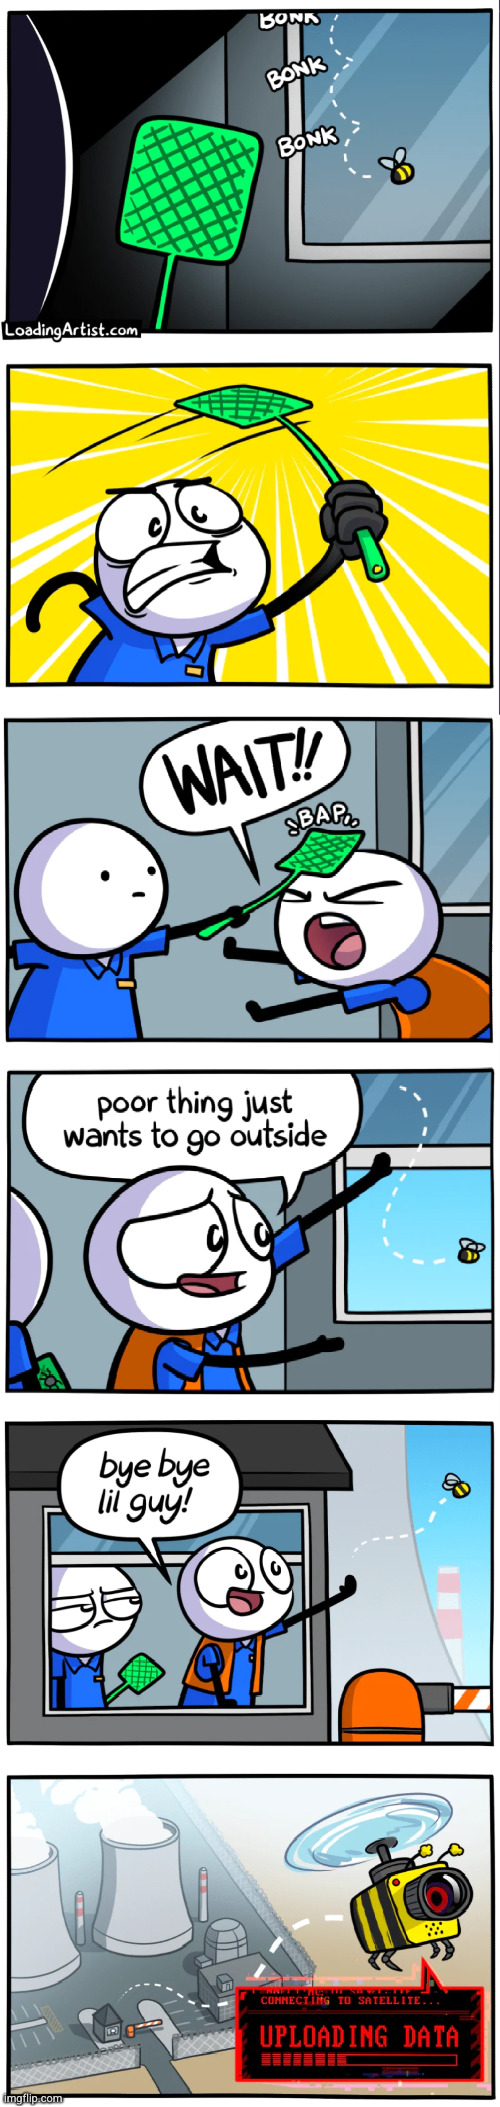 I GET TO BE THE FIRST TO UPLOAD THE NEW LOADINGARTIST COMIC MEMEMEMEME MEEEE #2,943 | image tagged in comics/cartoons,comics,loading,artist,bees,robot | made w/ Imgflip meme maker